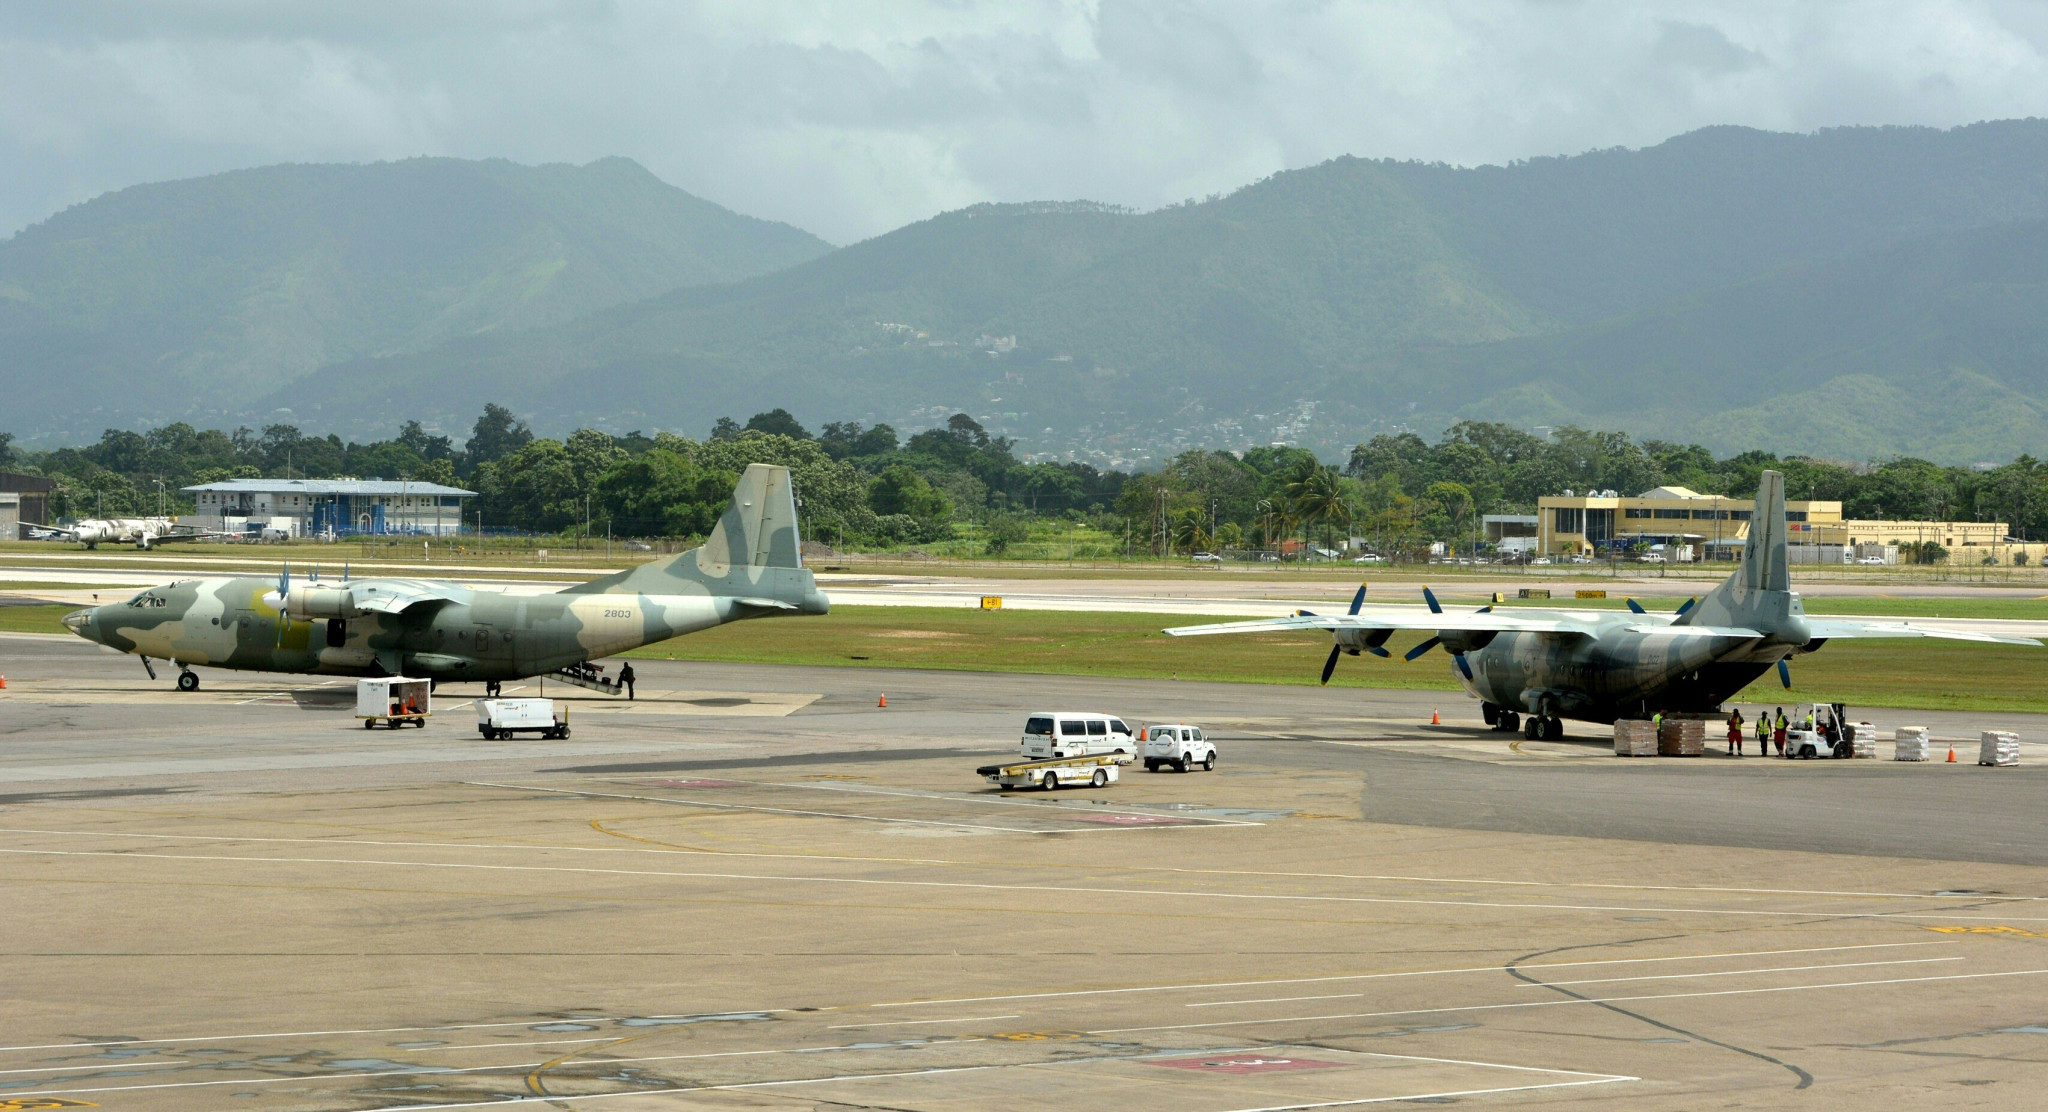 The Piarco International Airport on Trinidad forms an 